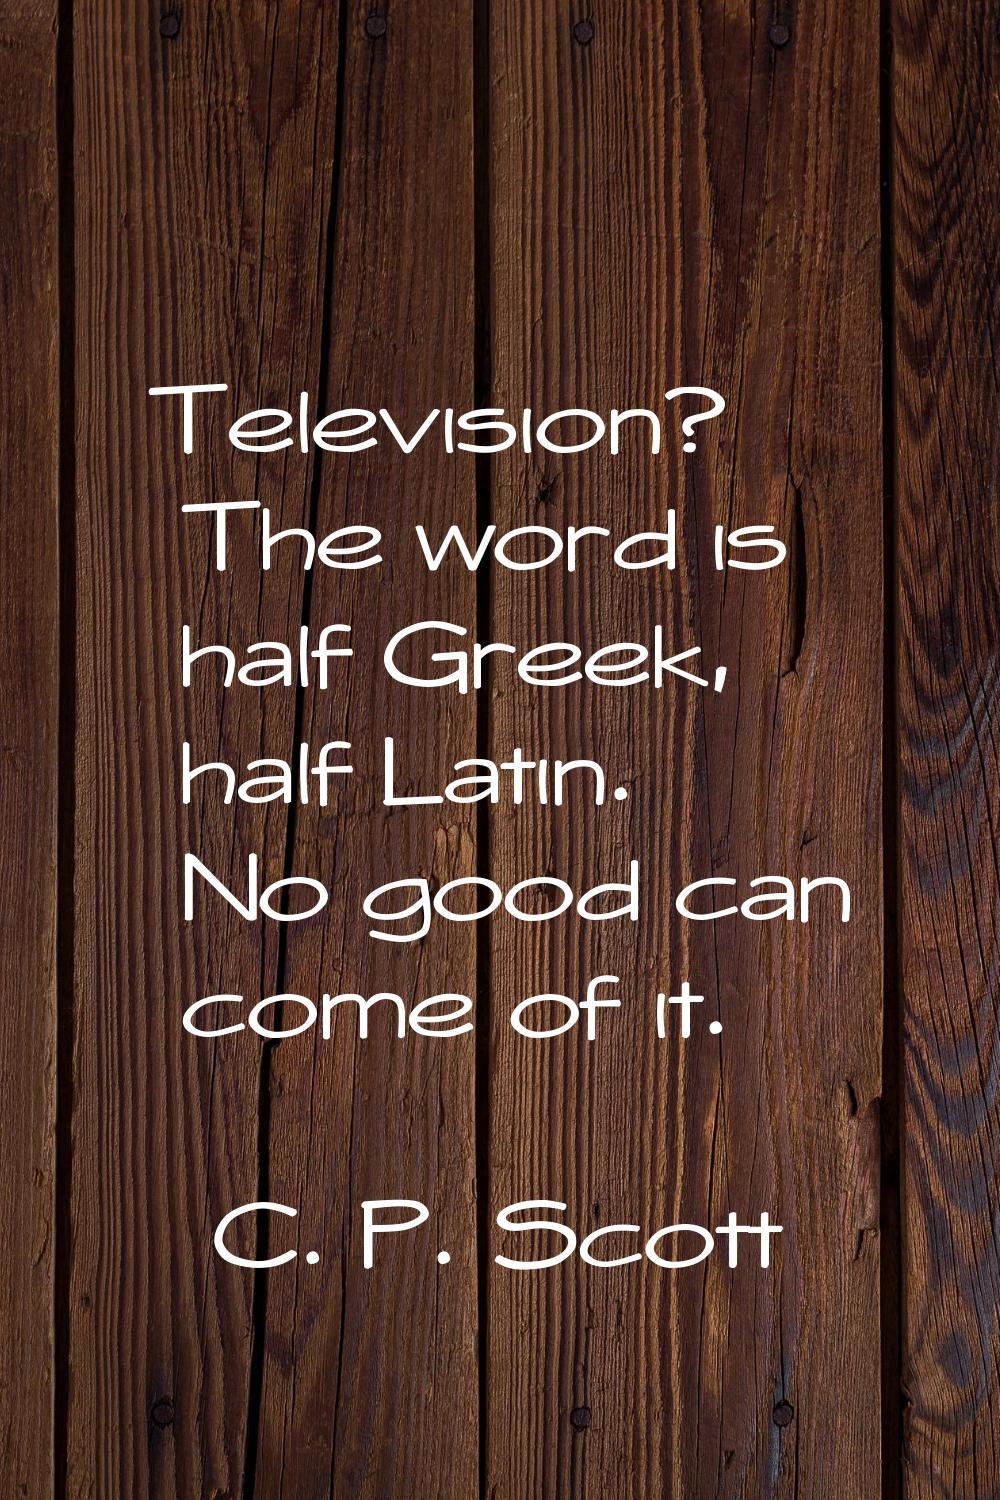 Television? The word is half Greek, half Latin. No good can come of it.